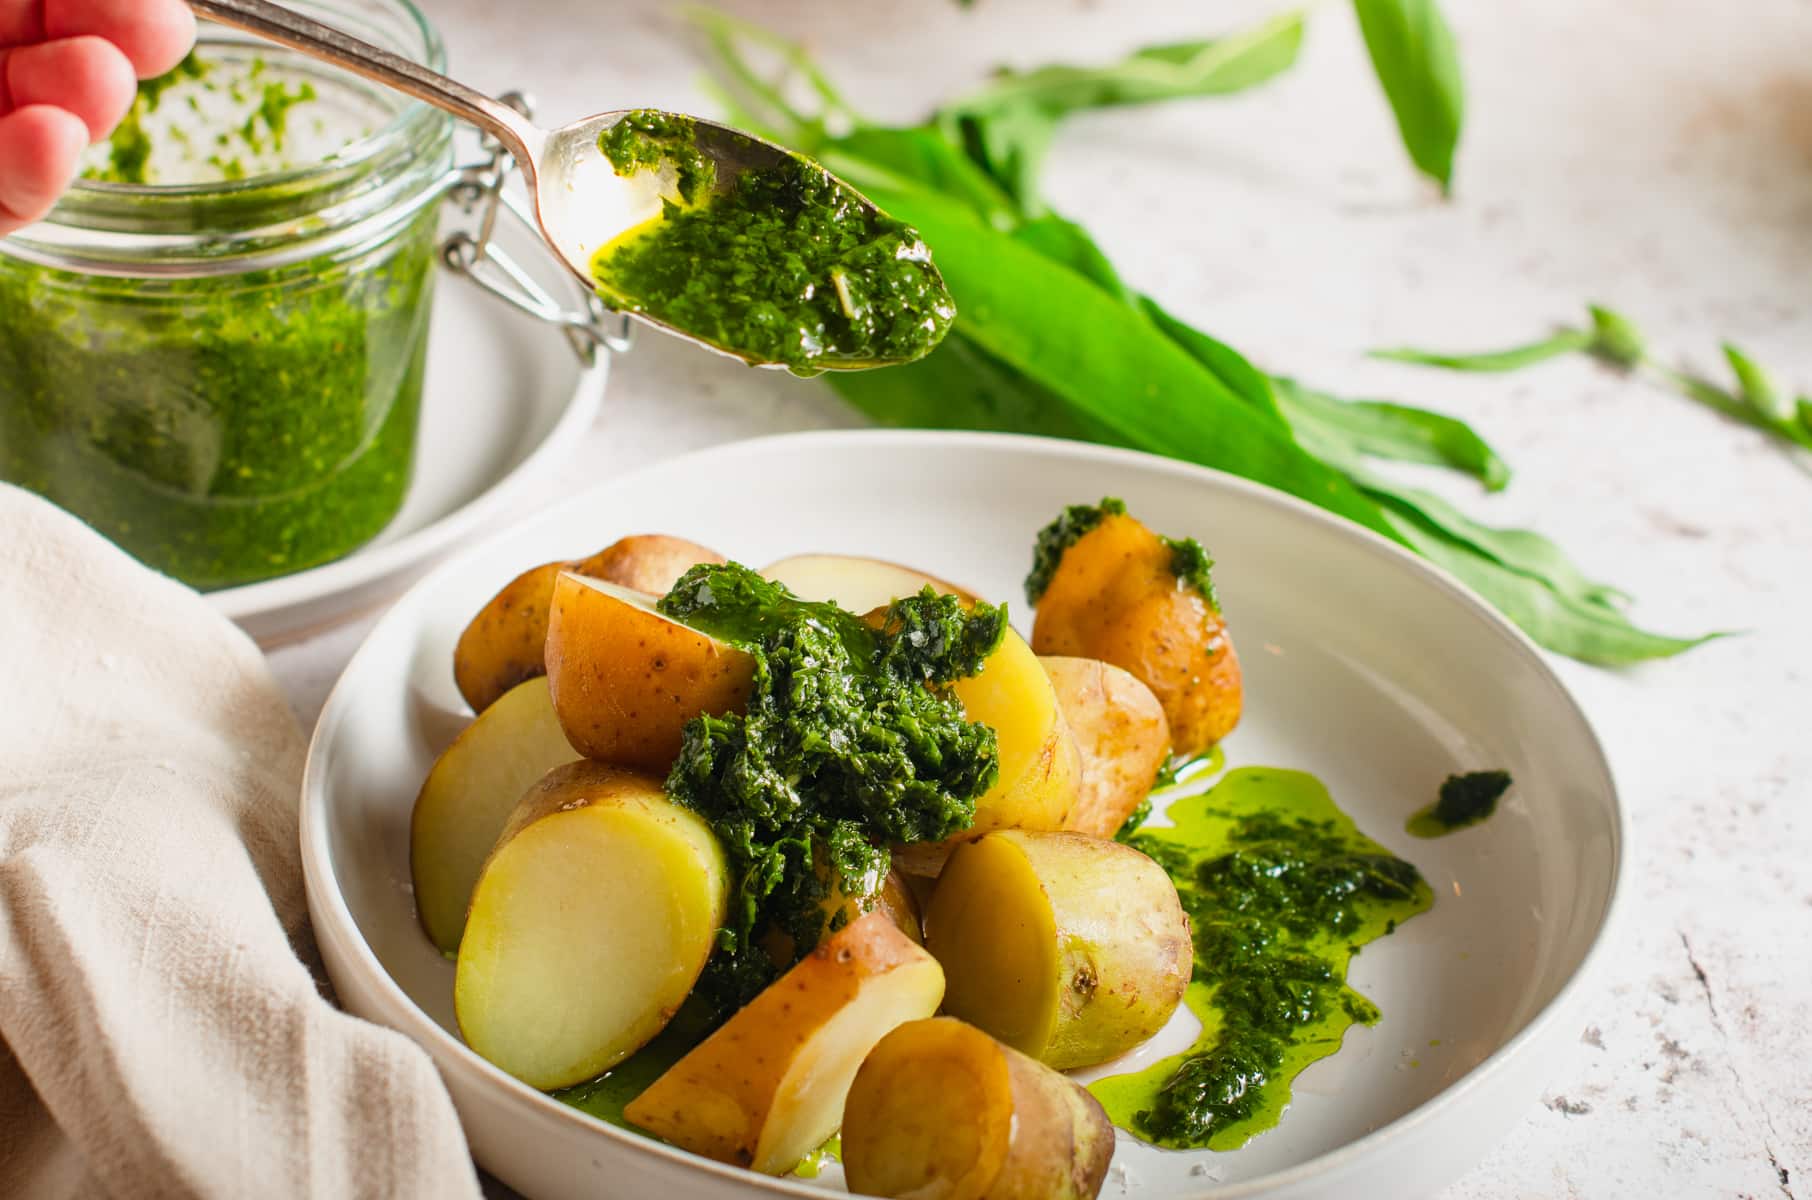 A serving suggestion of wild garlic chimichurri over top of fresh boiled potatoes.